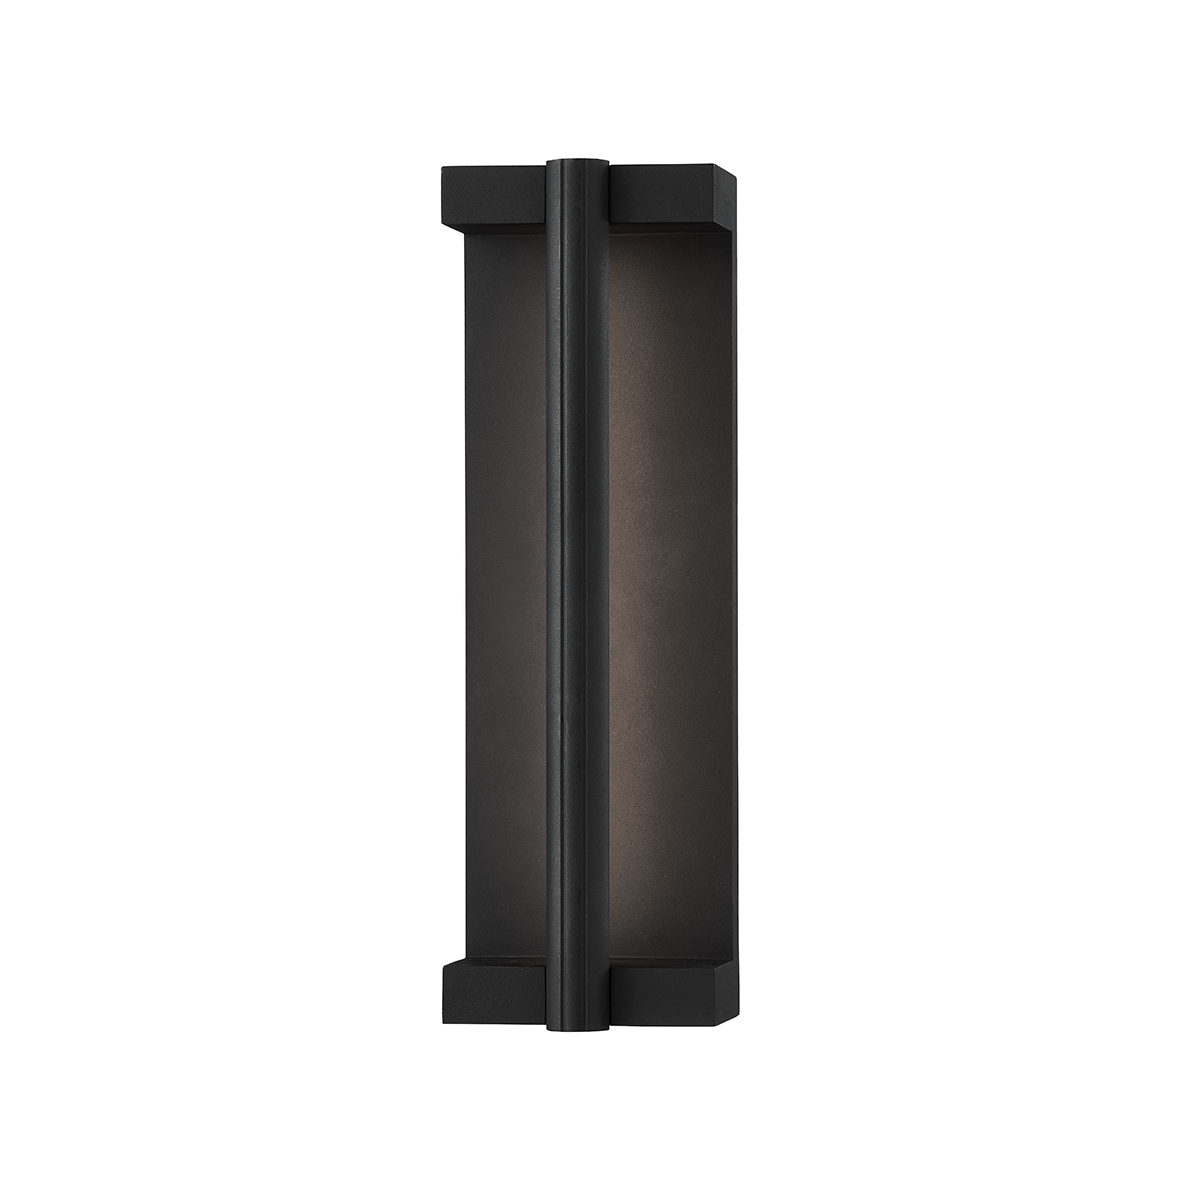 Troy Lighting 1 LIGHT SMALL EXTERIOR WALL SCONCE B1251 Outdoor l Wall Troy Lighting TEXTURE BLACK  